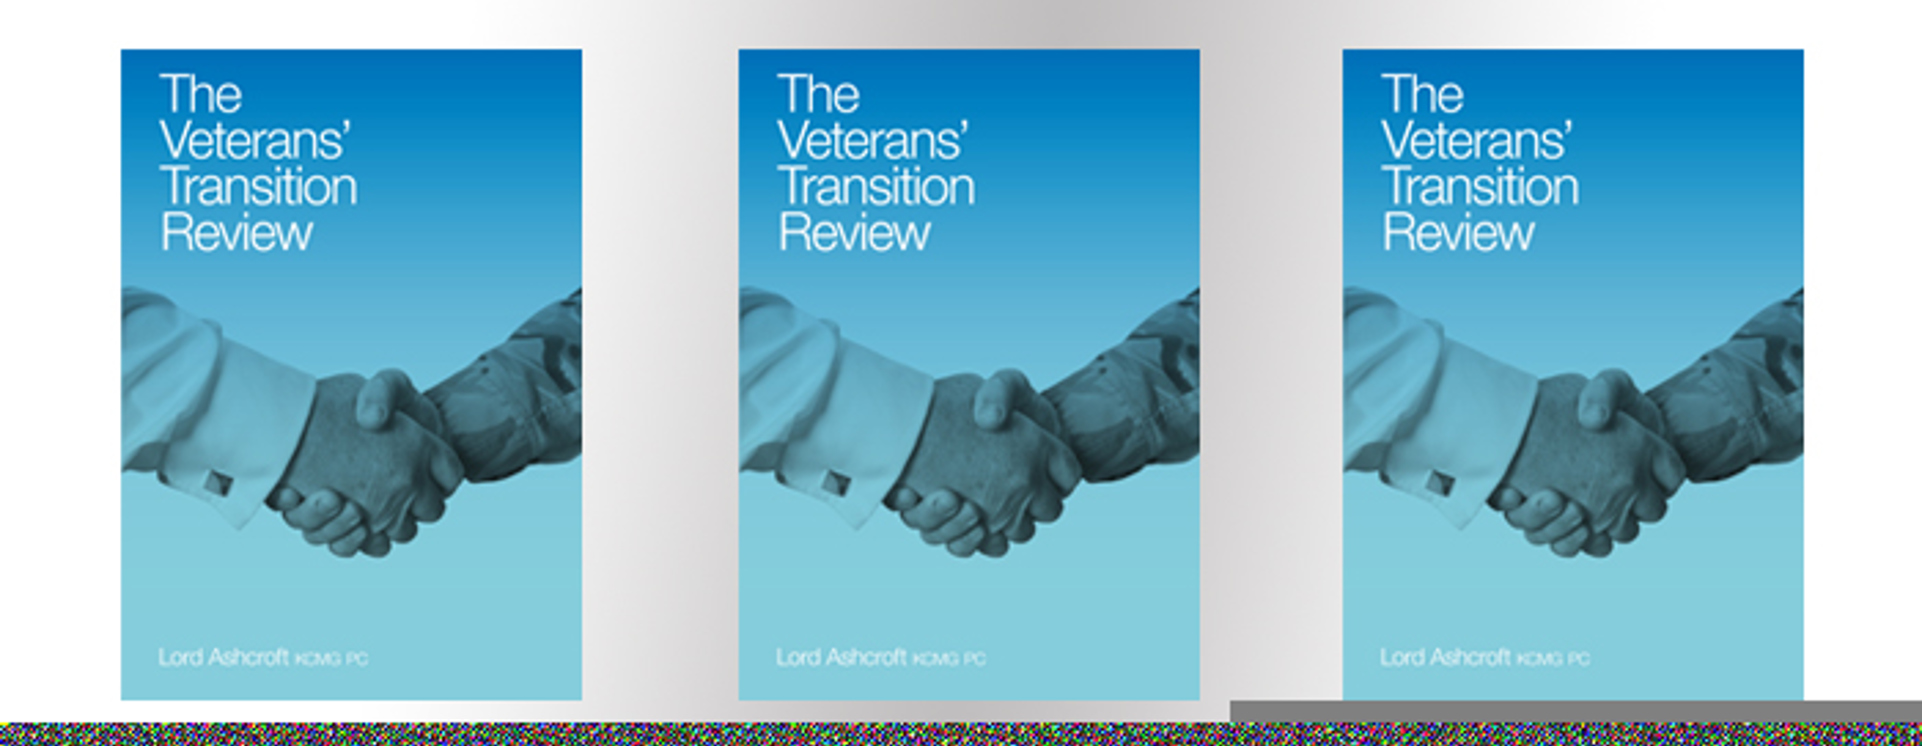 Lord Ashcroft’s Veterans’ Transition Review